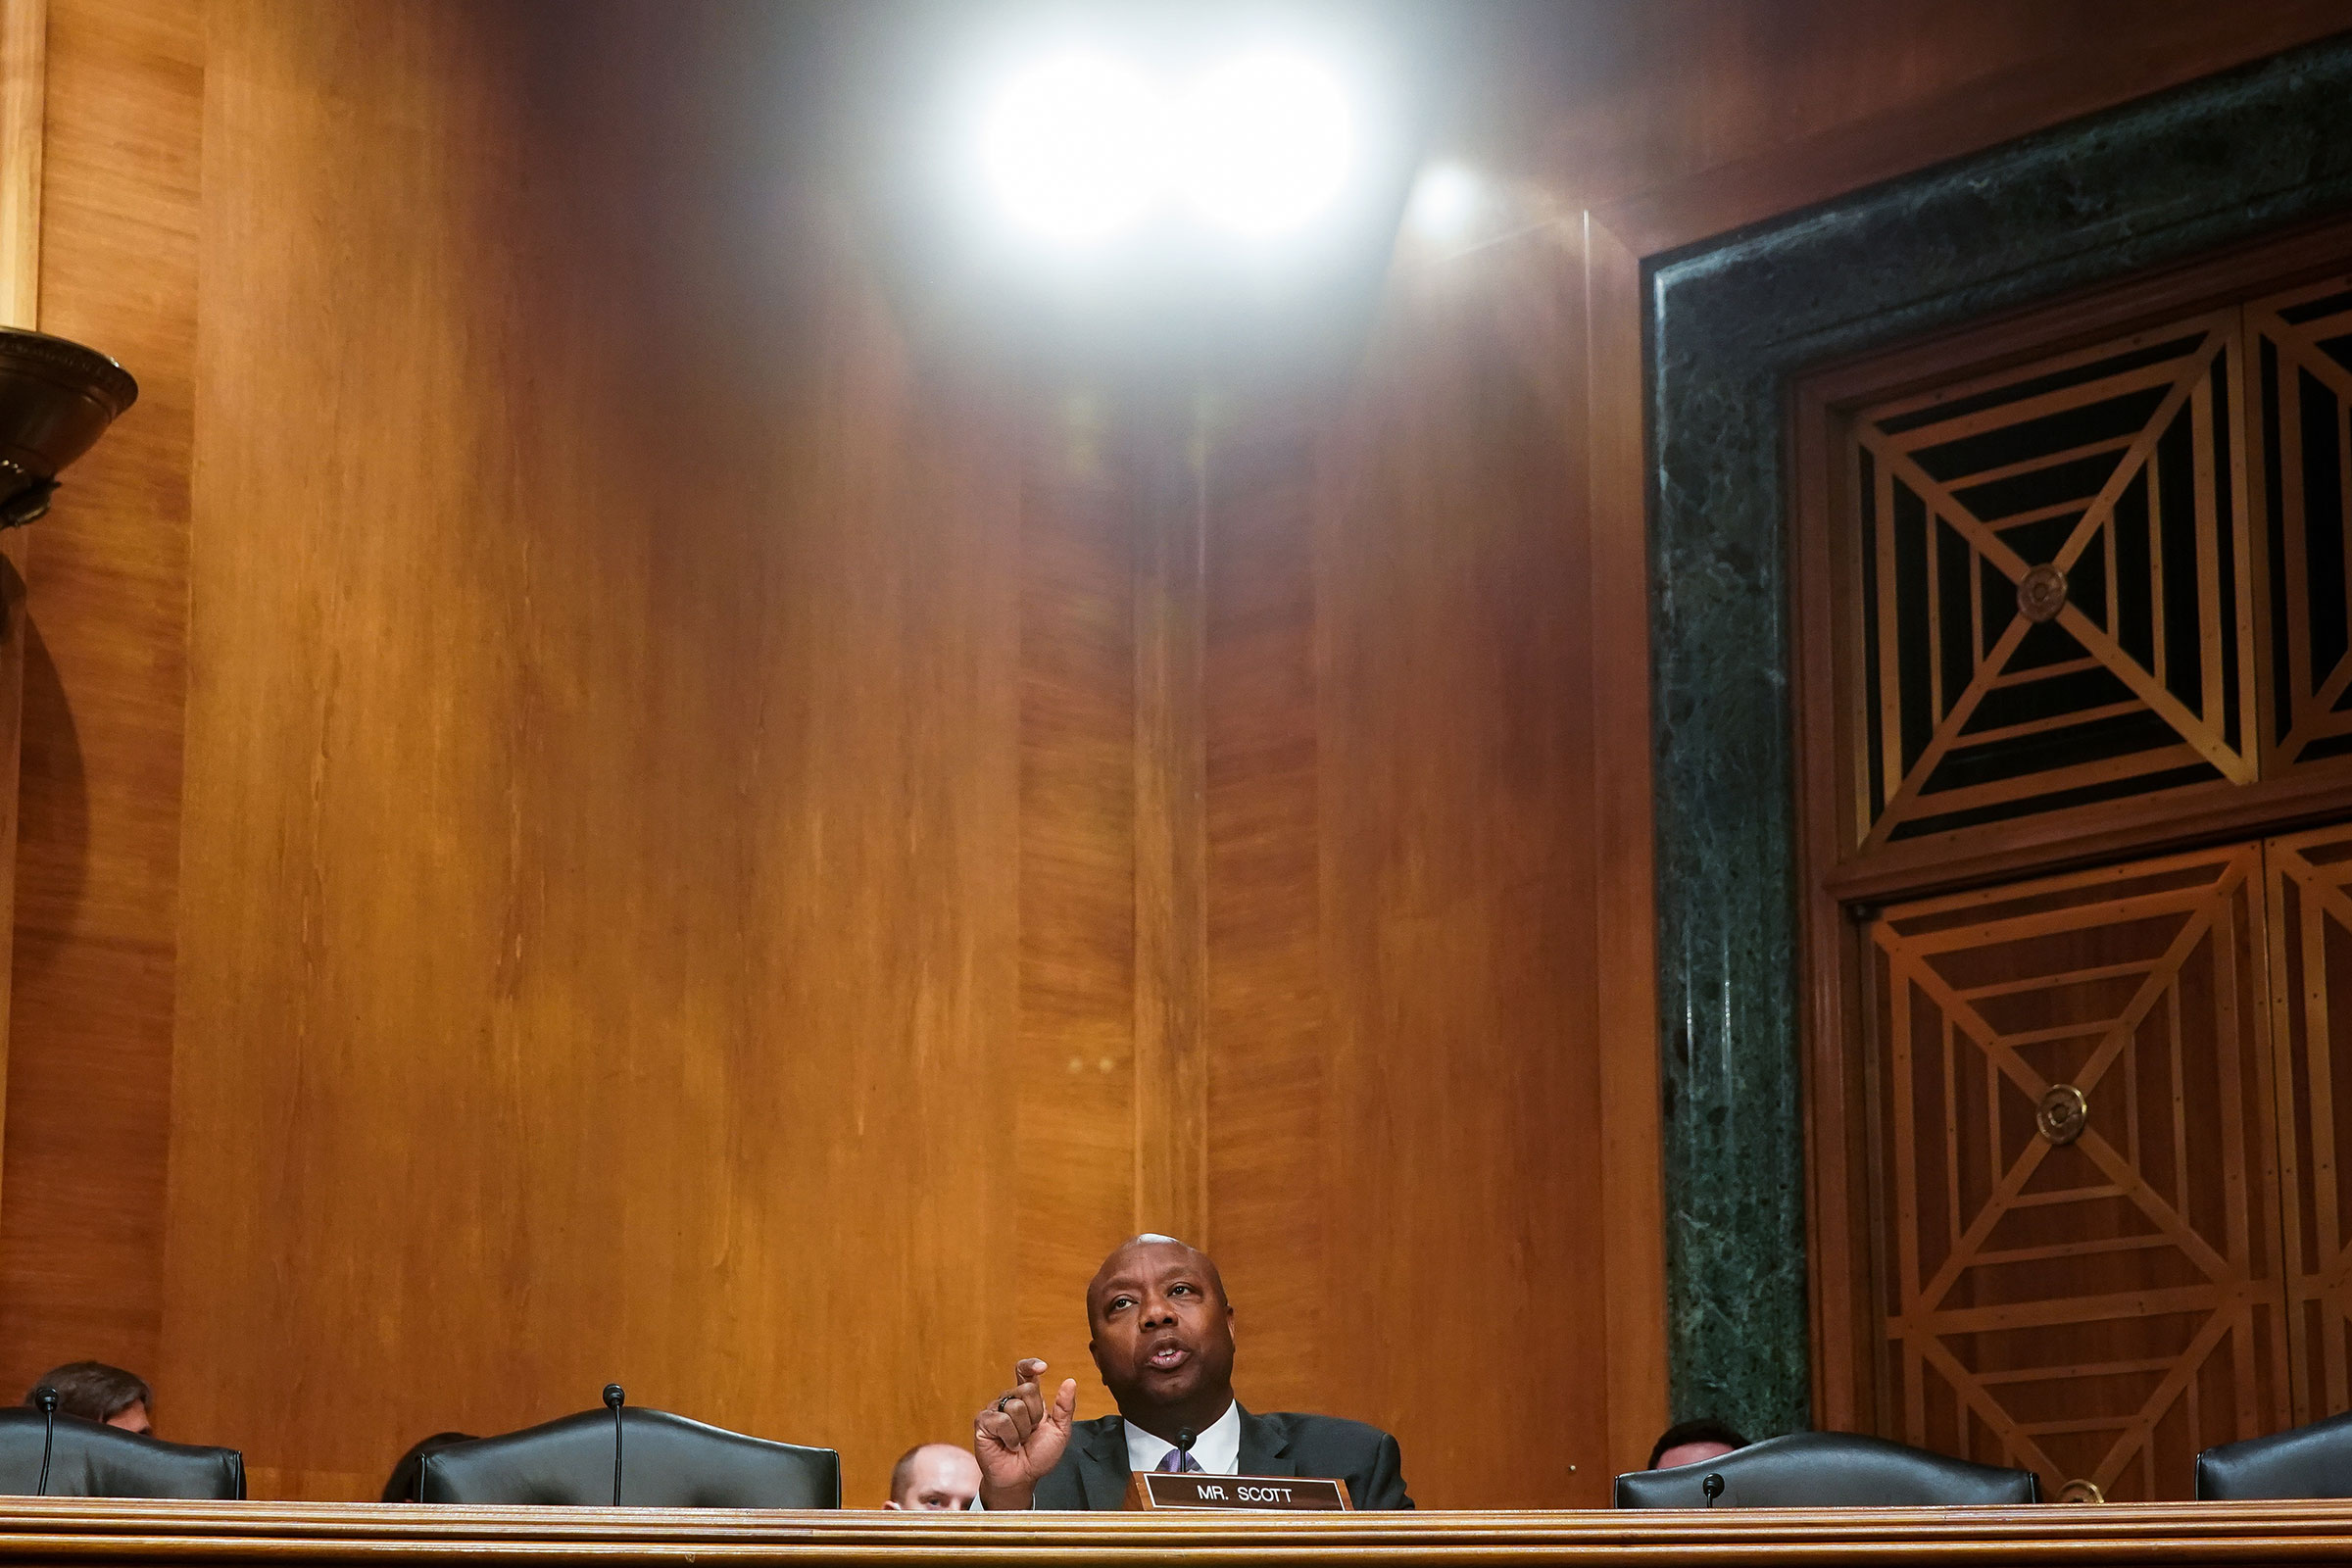 Senator Tim Scott speaks at a Senate Banking, Housing and Urban Affairs Committee hearing with U.S. Treasury Secretary Janet Yellen on the Financial Stability Oversight Council Annual Report to Congress on May 10, 2022.